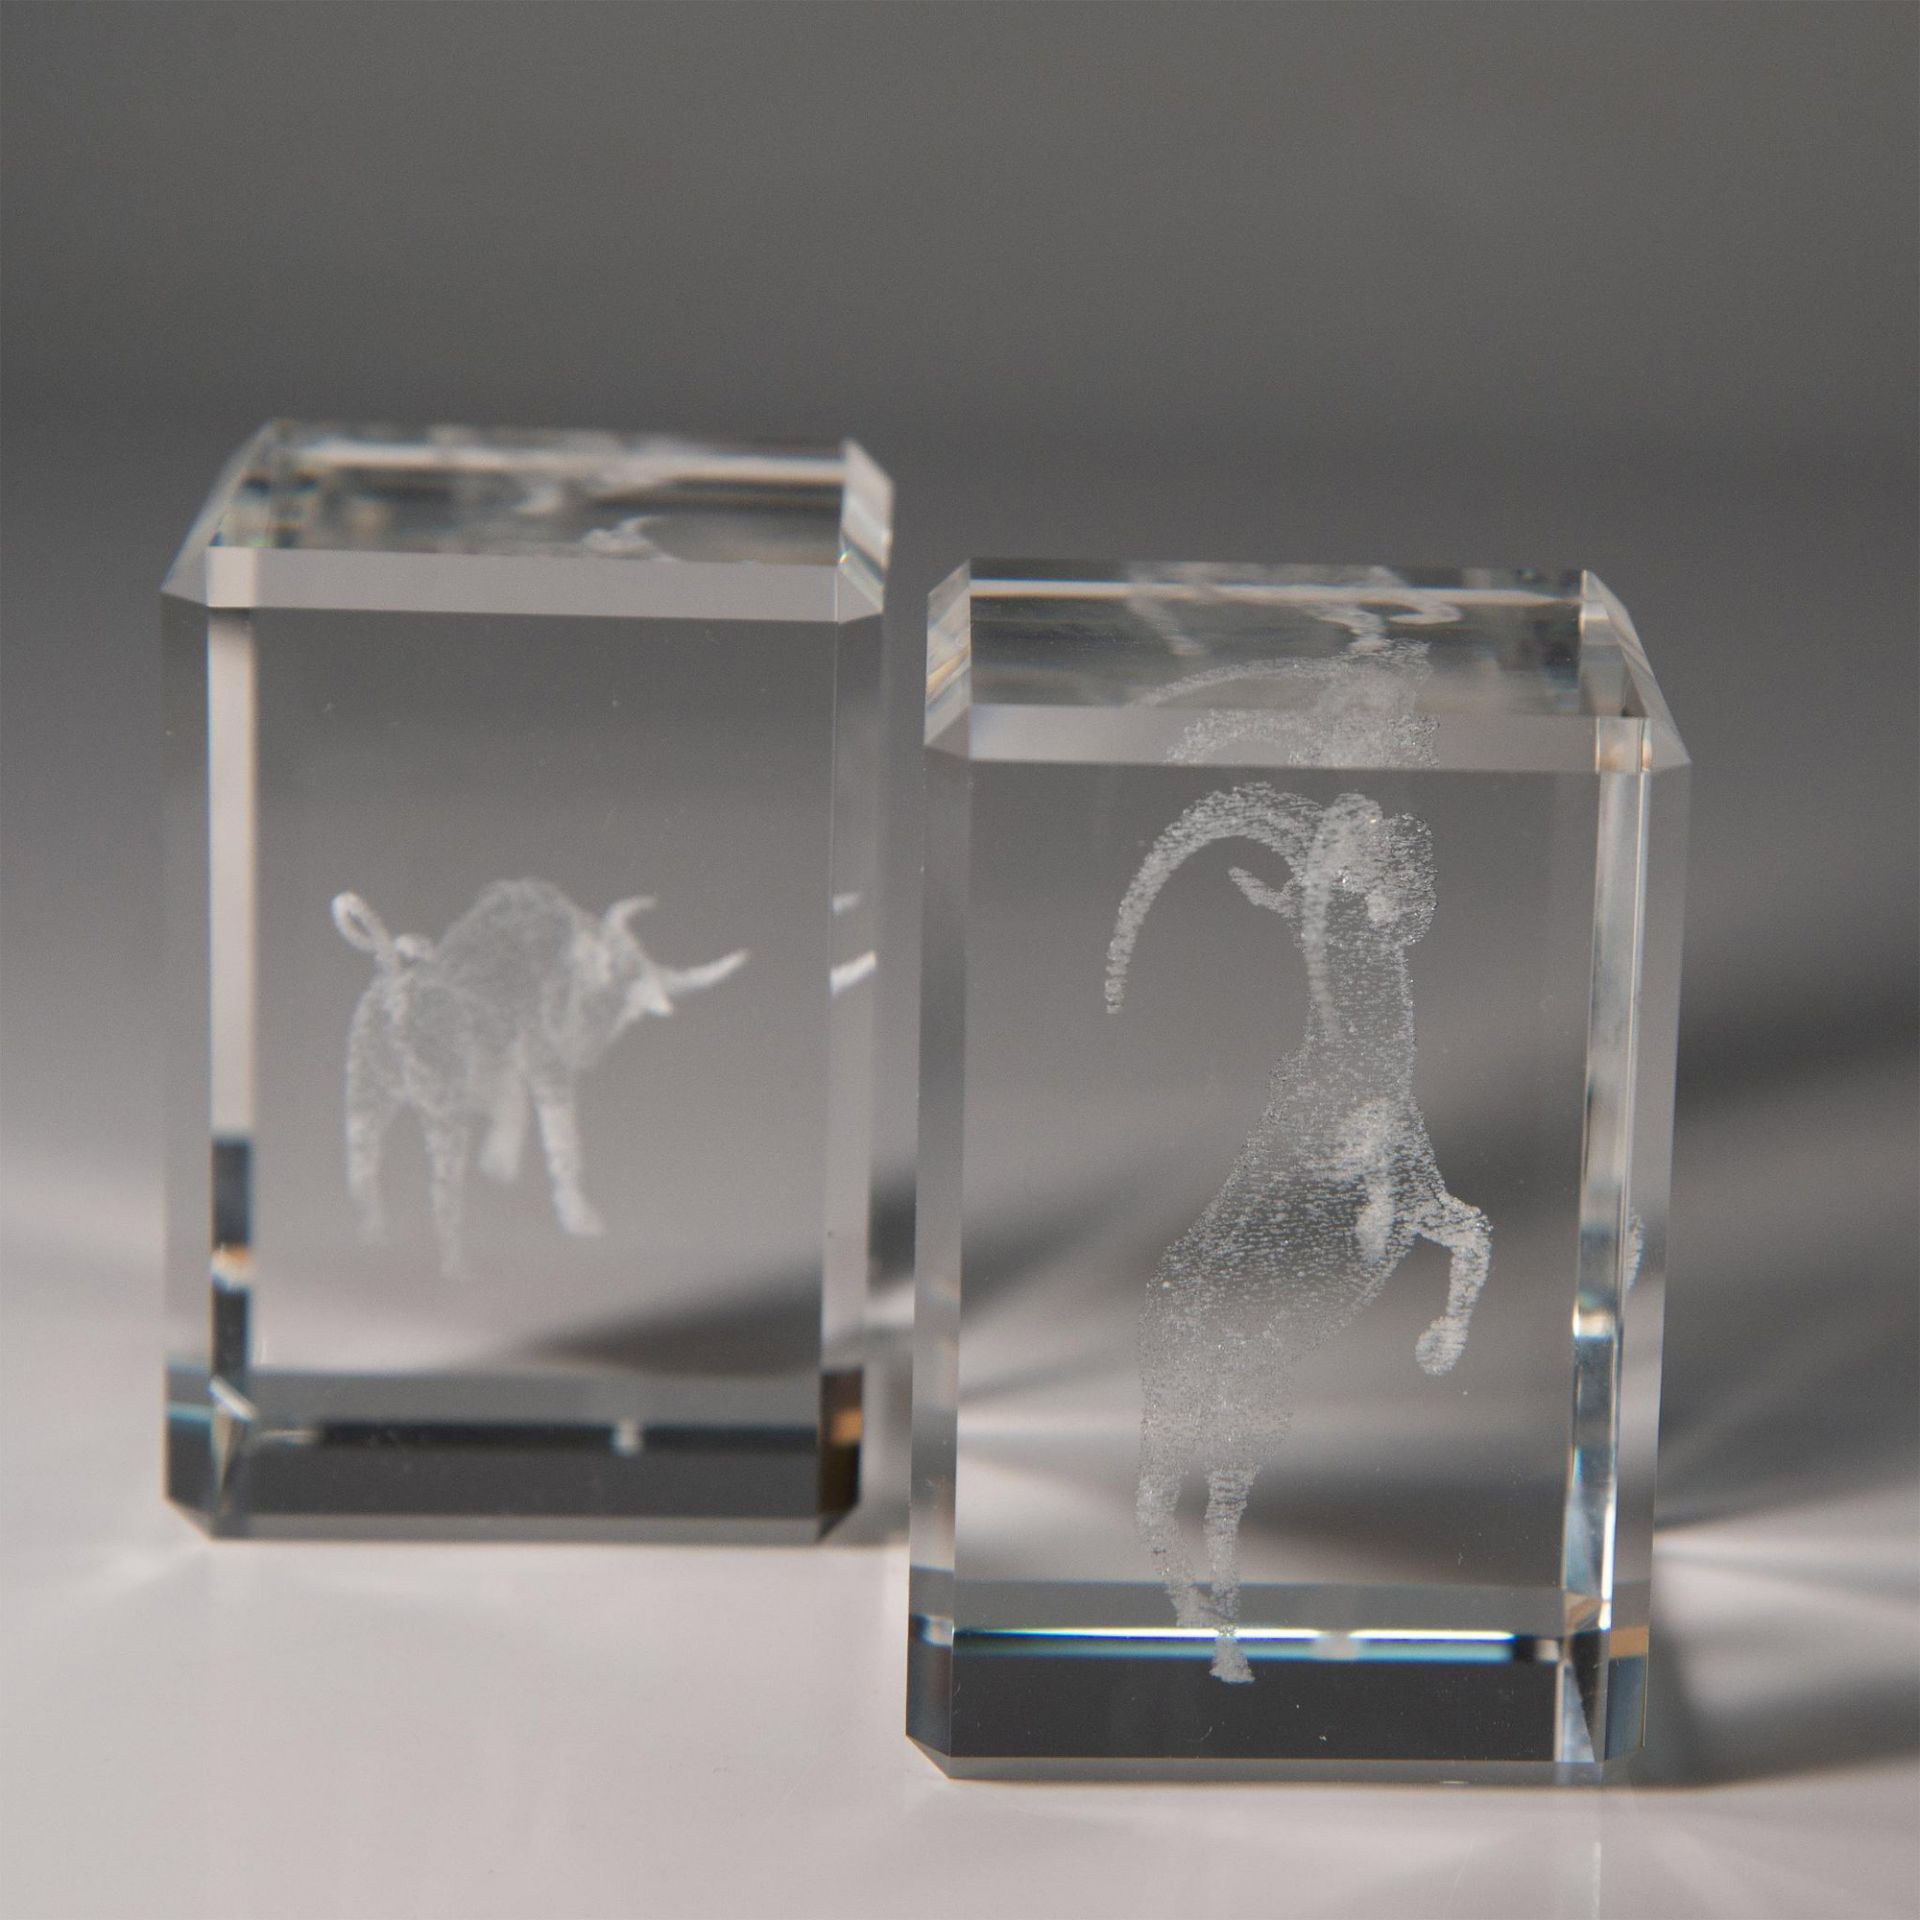 Pair of Ox and Goat Laser Paperweights - Image 3 of 4